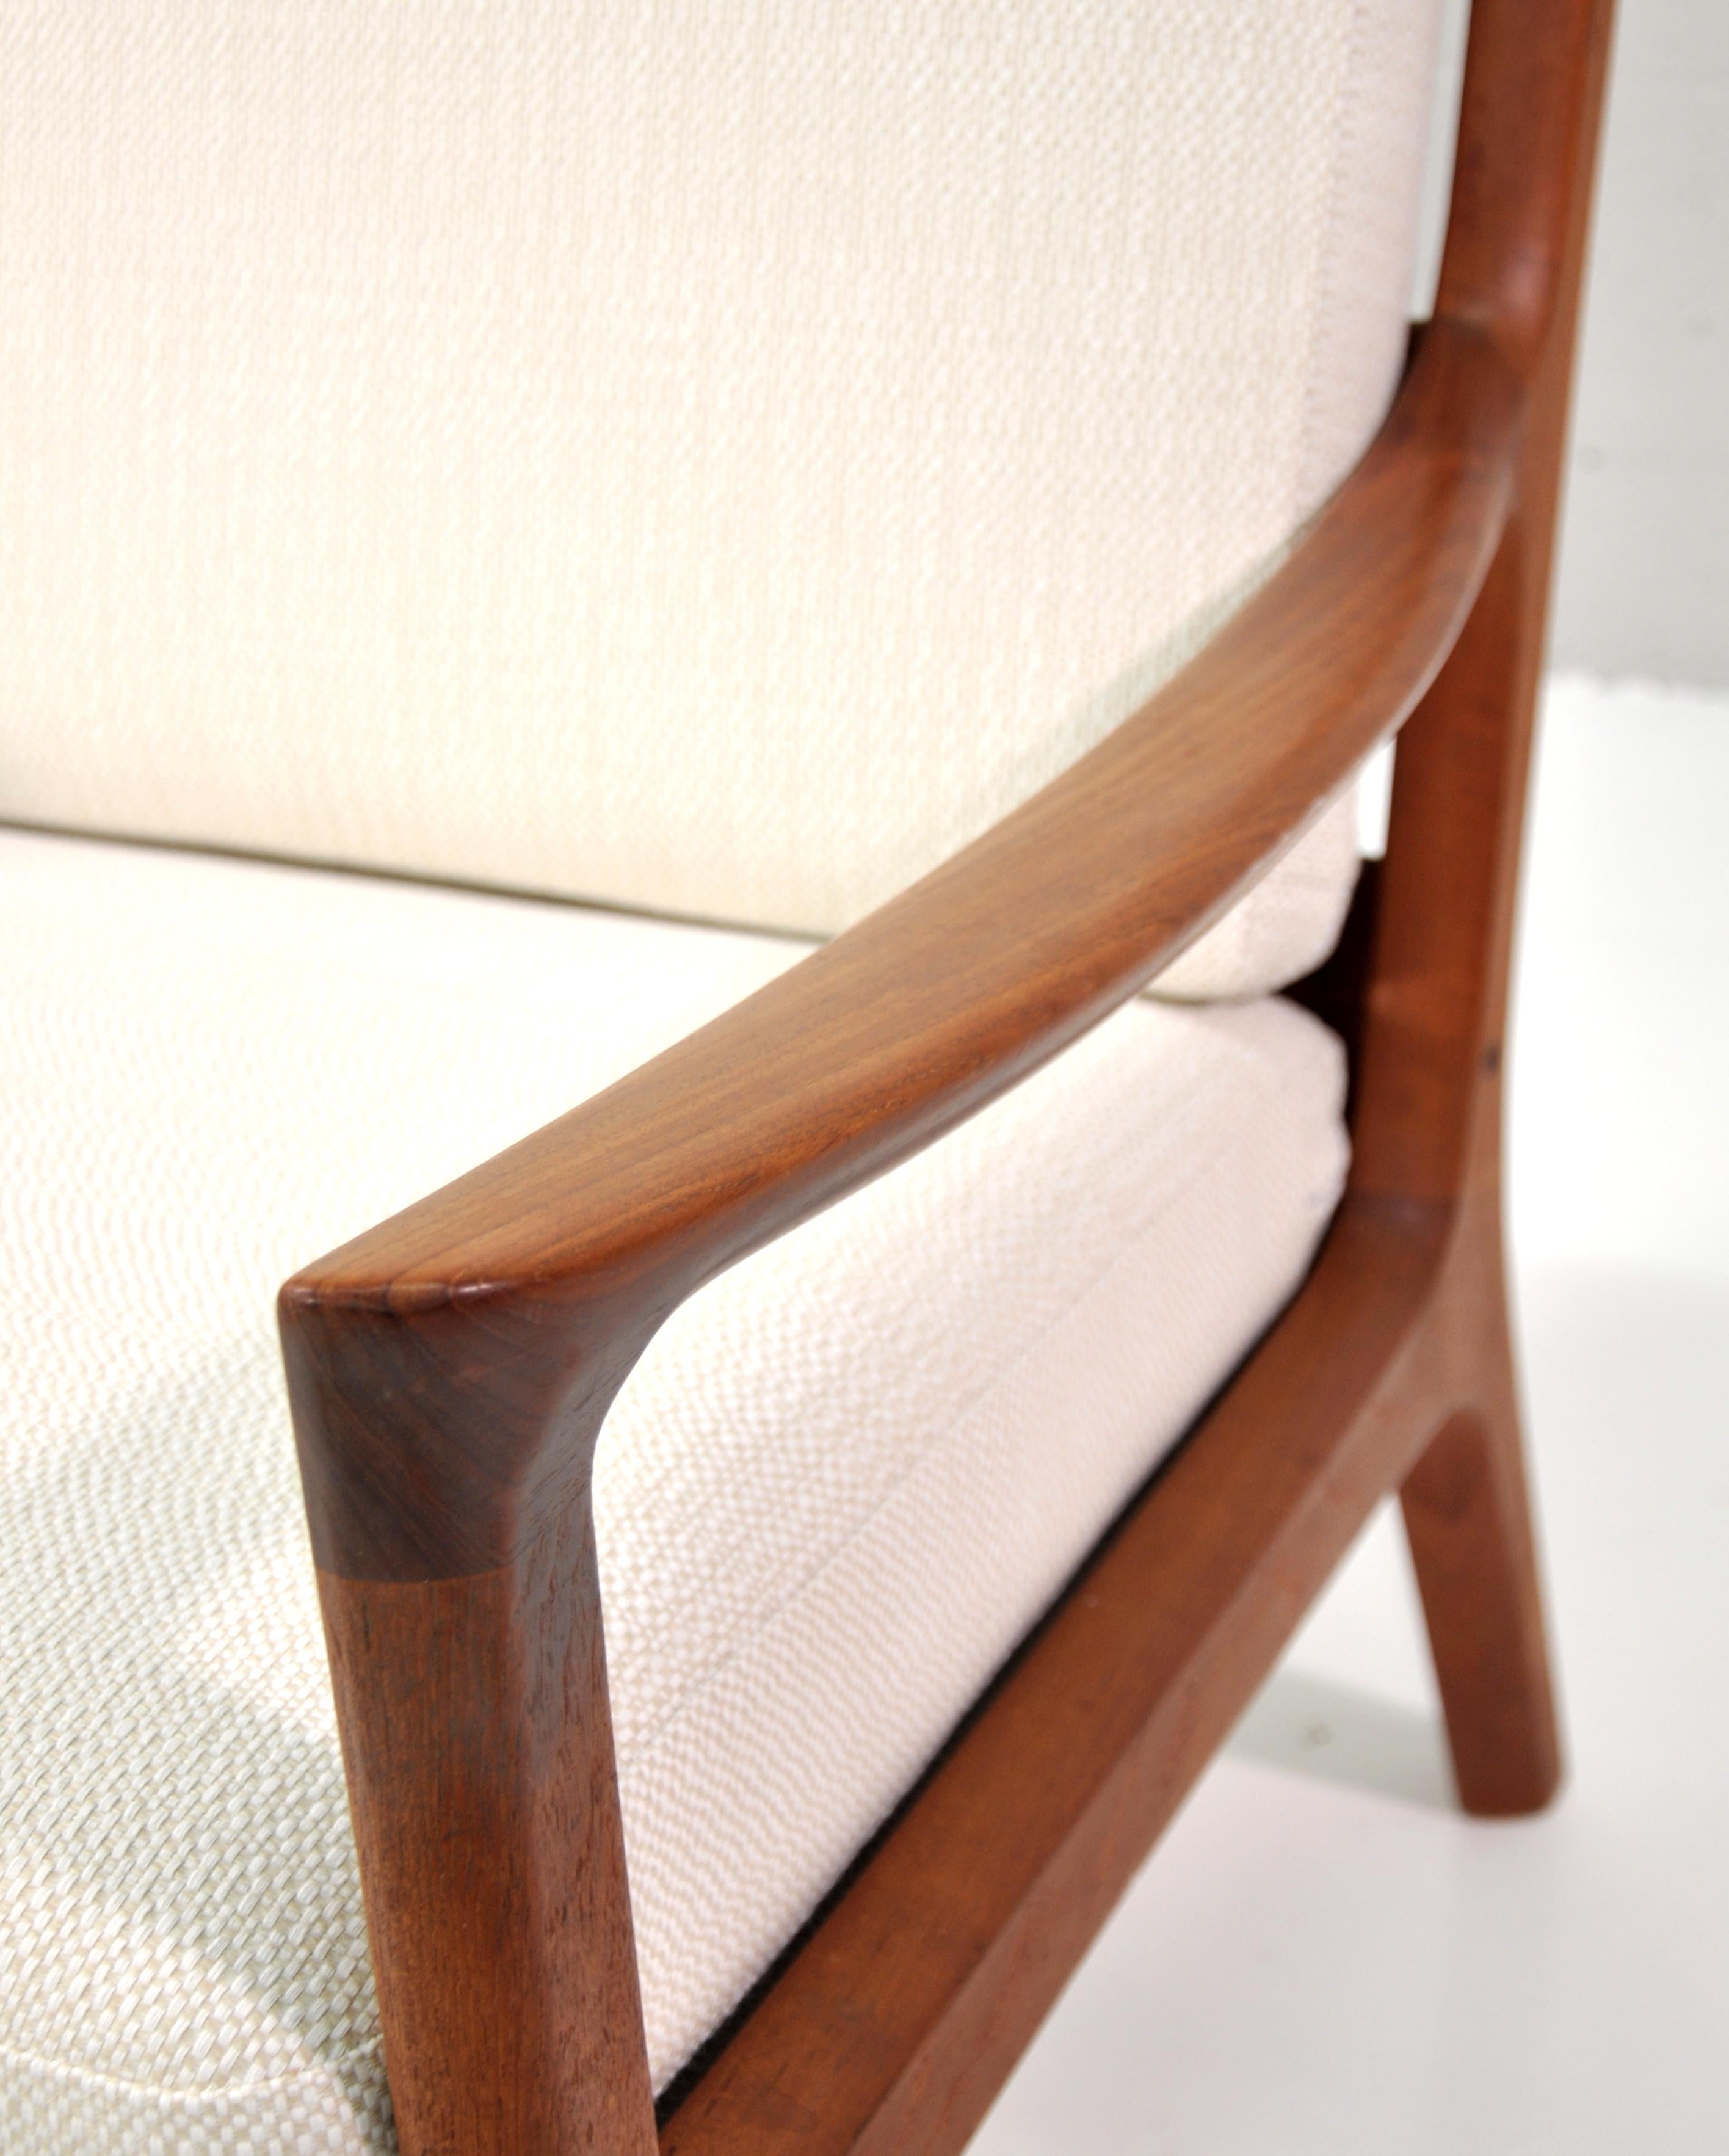 Newly reupholstered white vintage easy chair in teak, designed by Ole Wanscher for France and Daverkosen (later renamed France and Son) in 1951. Lounge chair model 116, aka Senator. Reupholstered in an off-white and beige textured dobby fabric. The